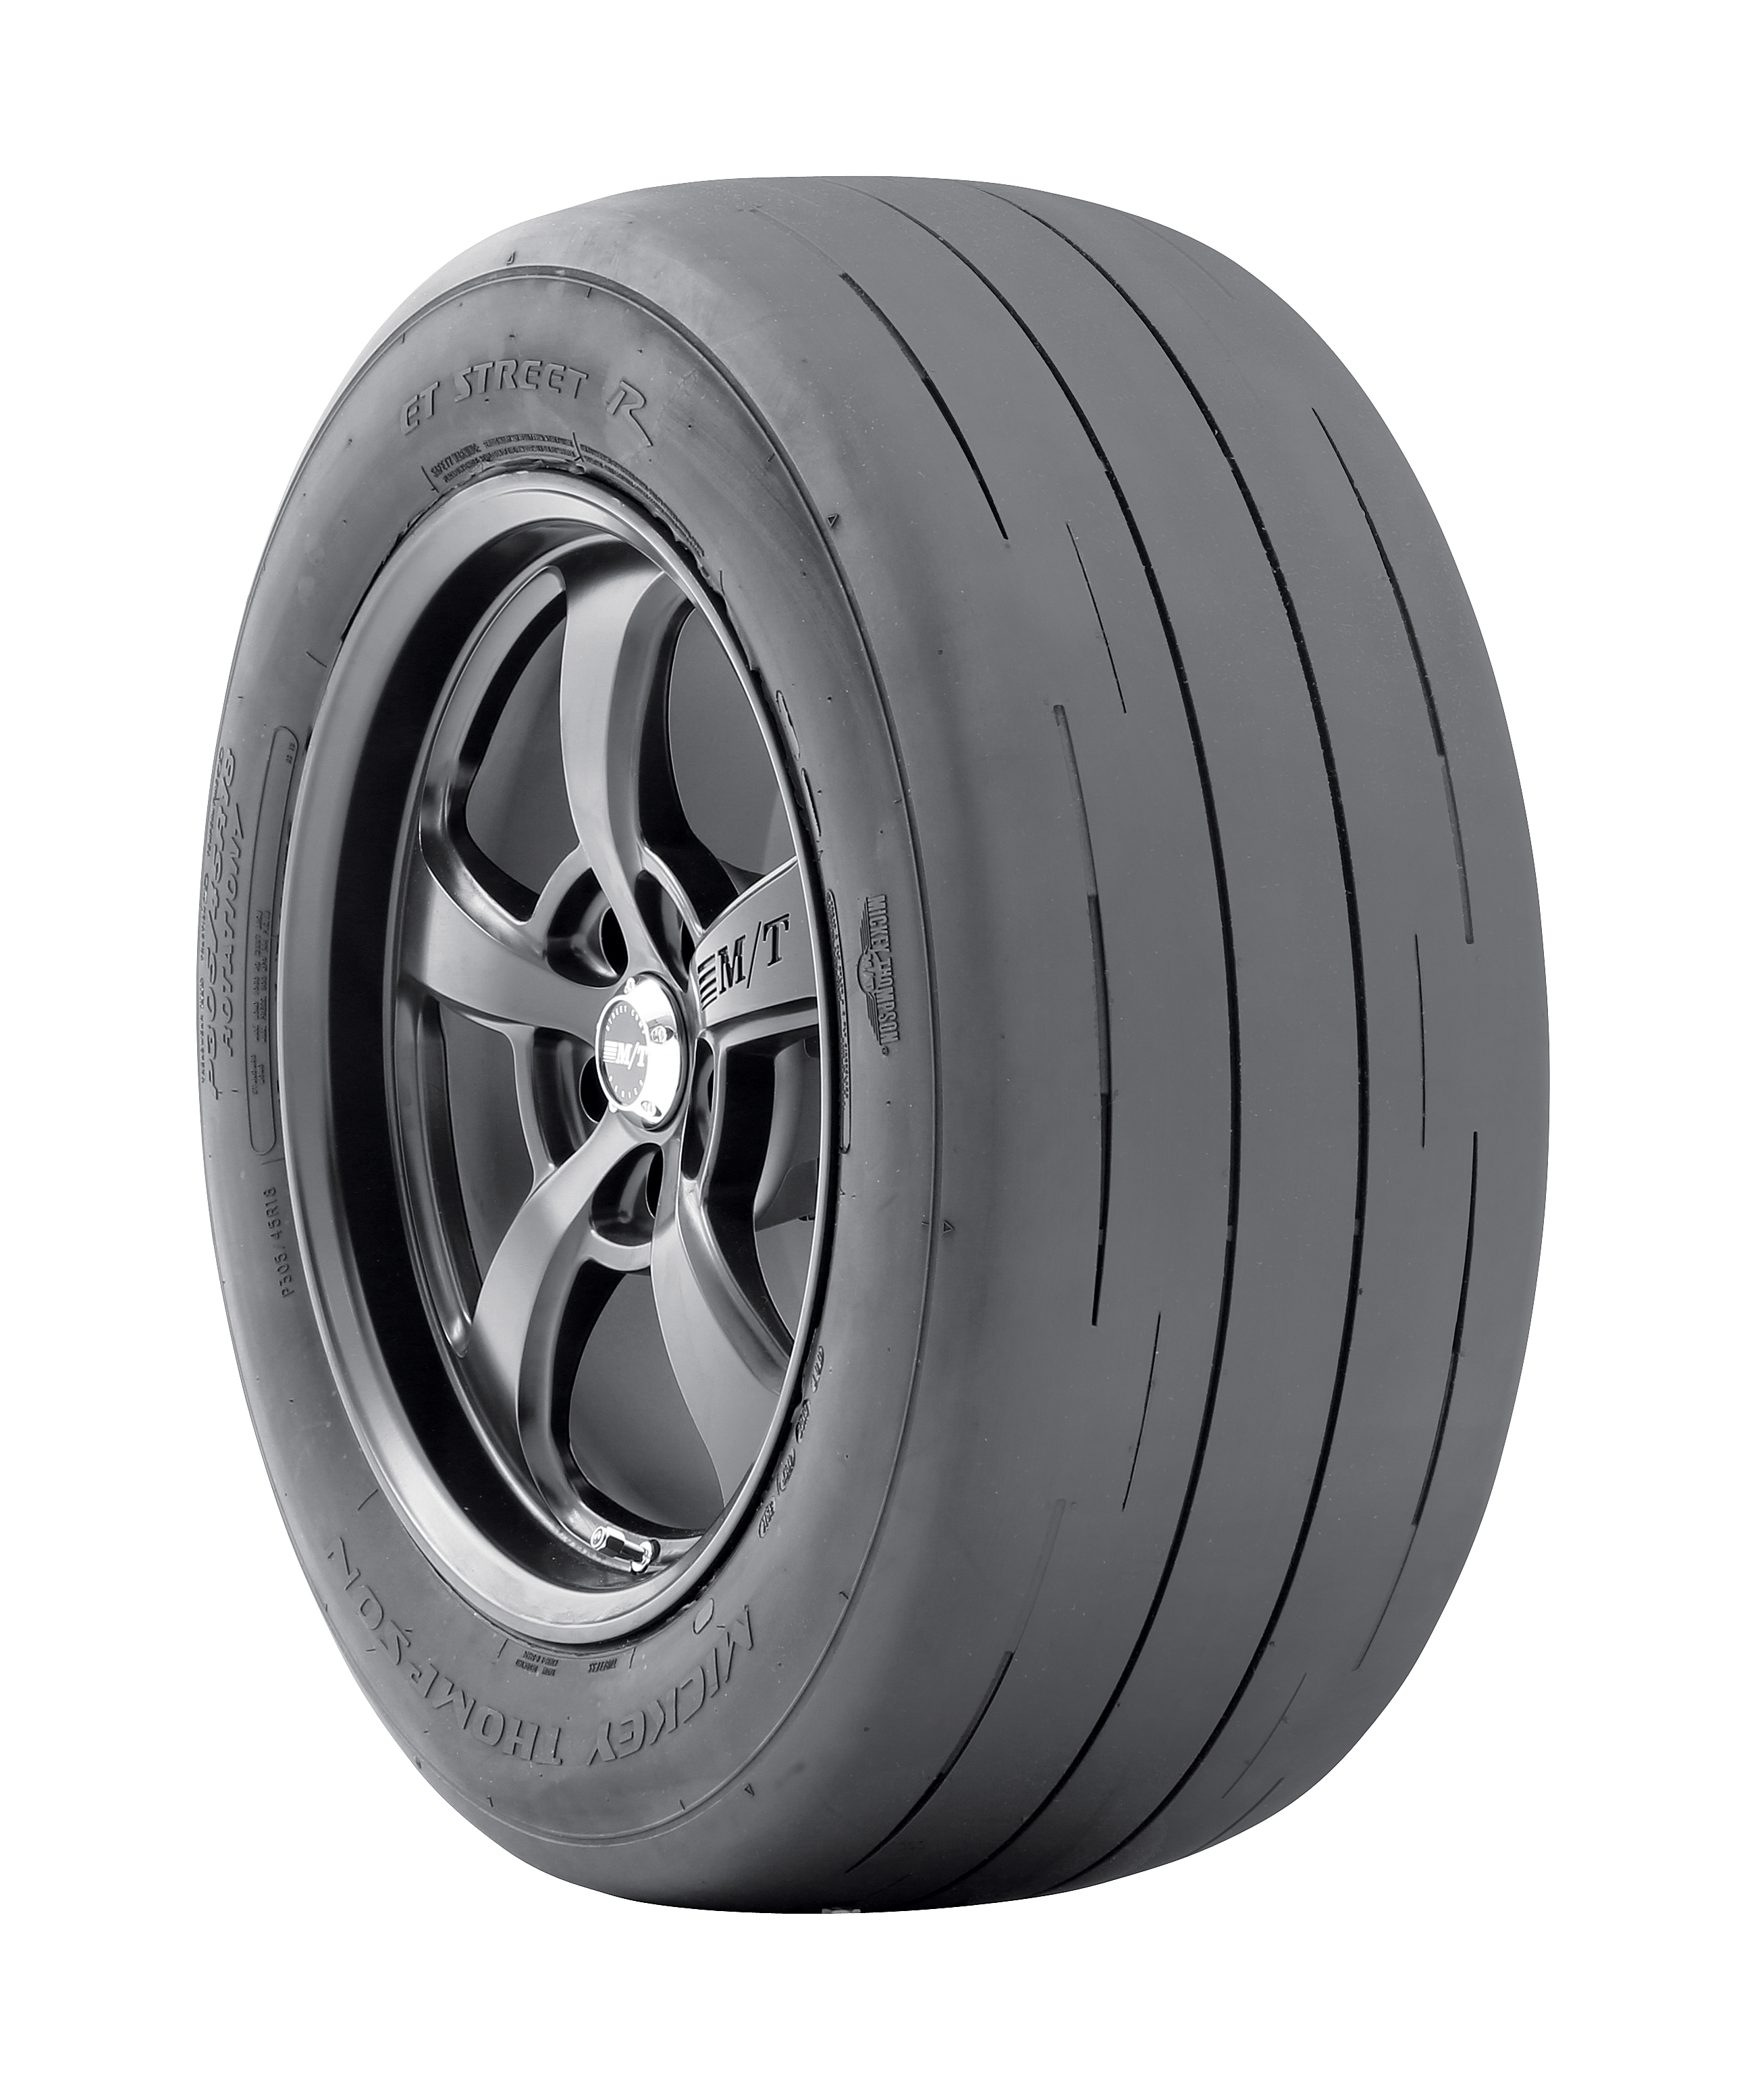 THE NEW ET STREET R FROM MICKEY THOMPSON PERFORMANCE TIRES &amp; WHEELS